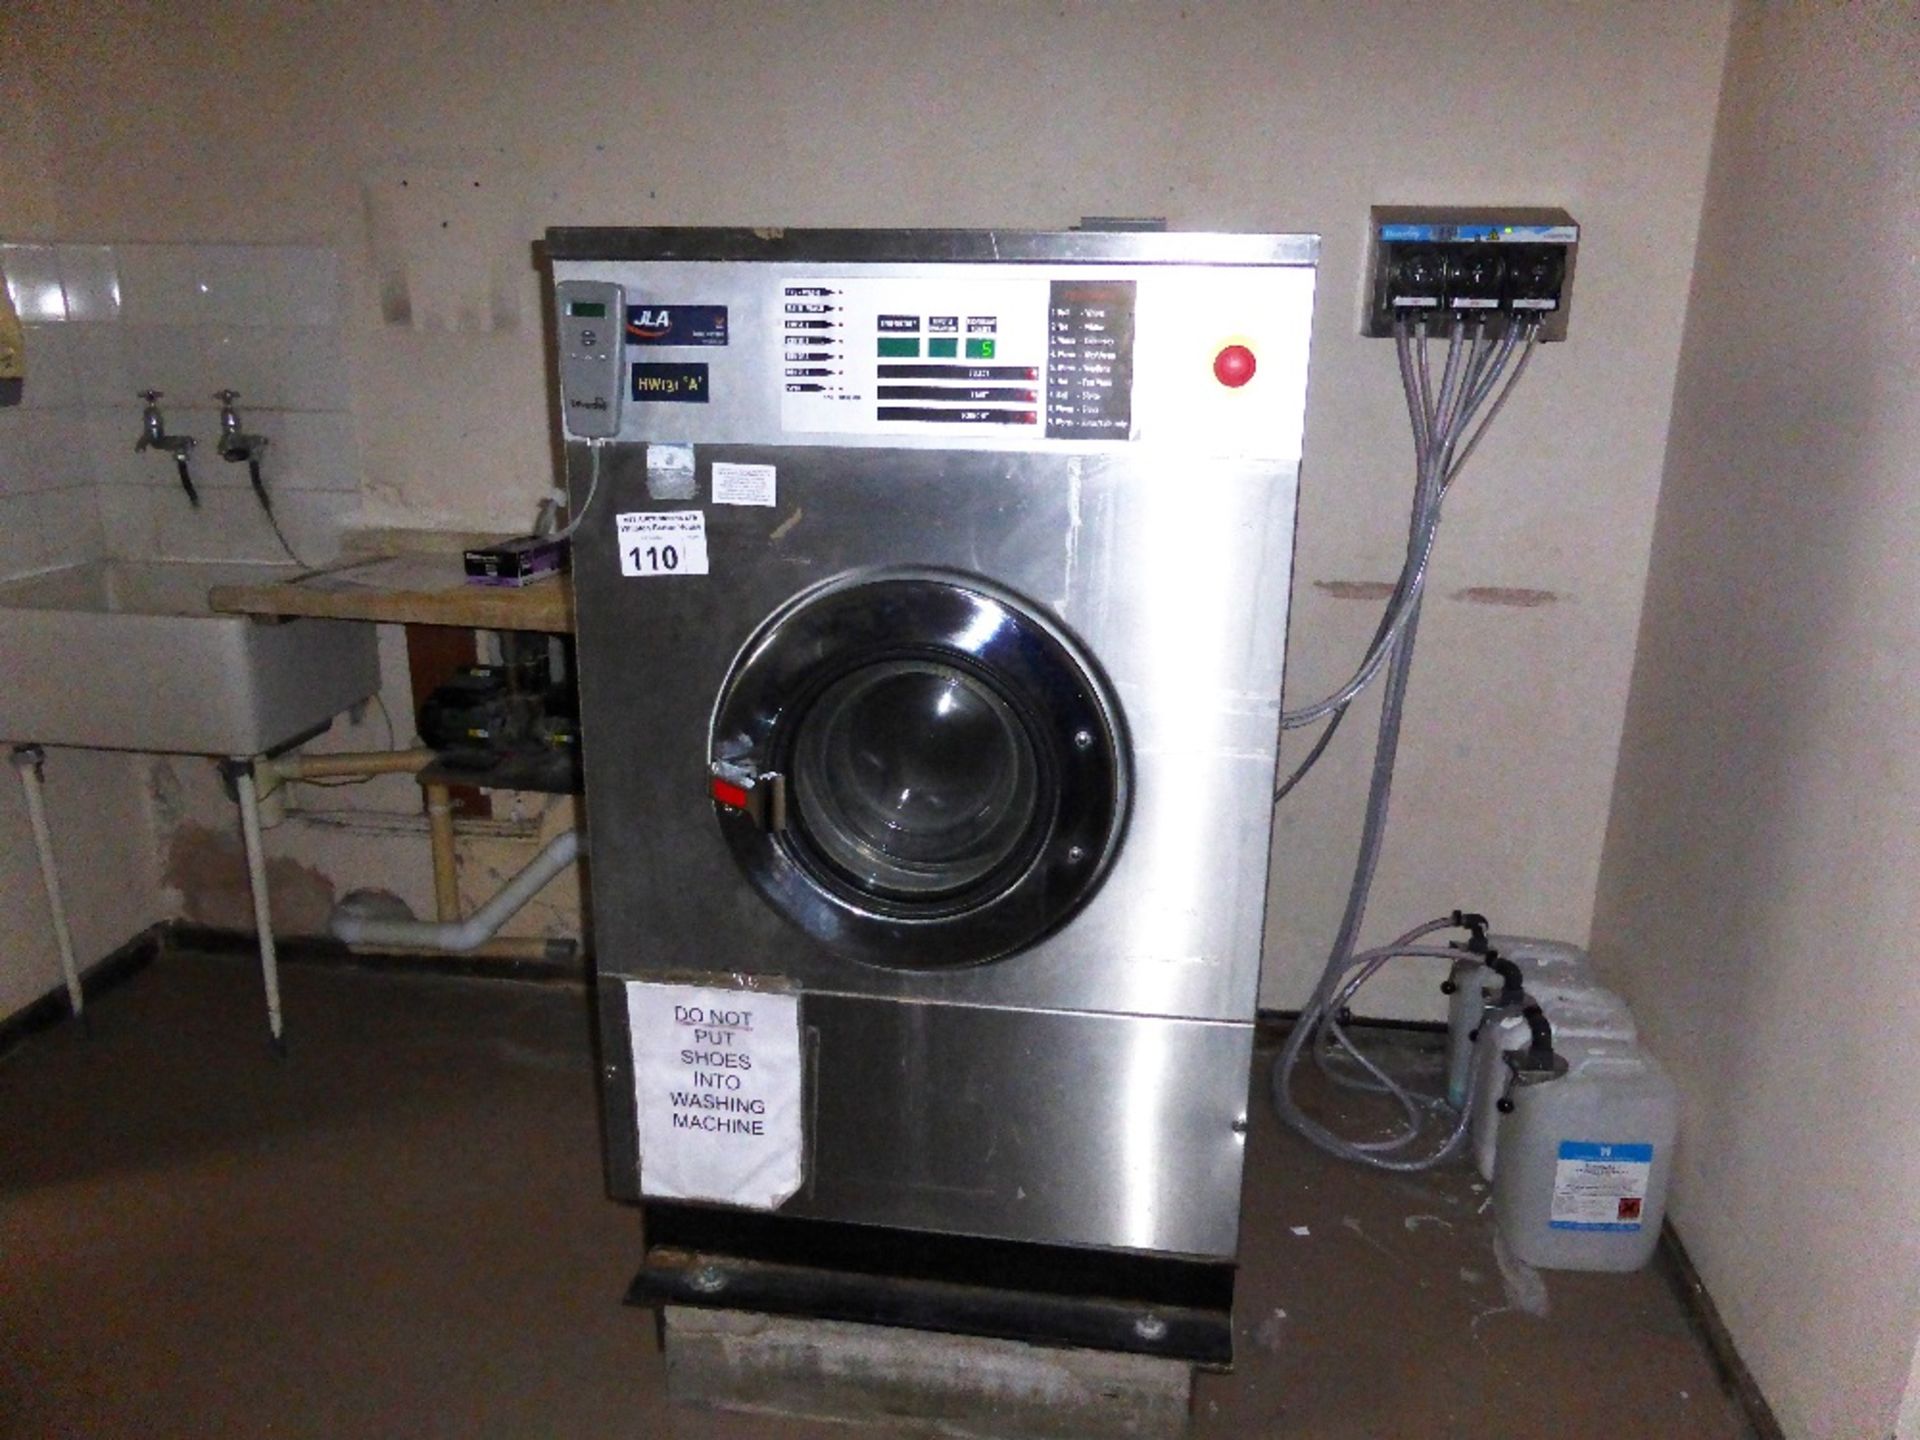 1 JLA stainless steel 3 phase commercial washing machine type:HW13A with Diversey L5000plus